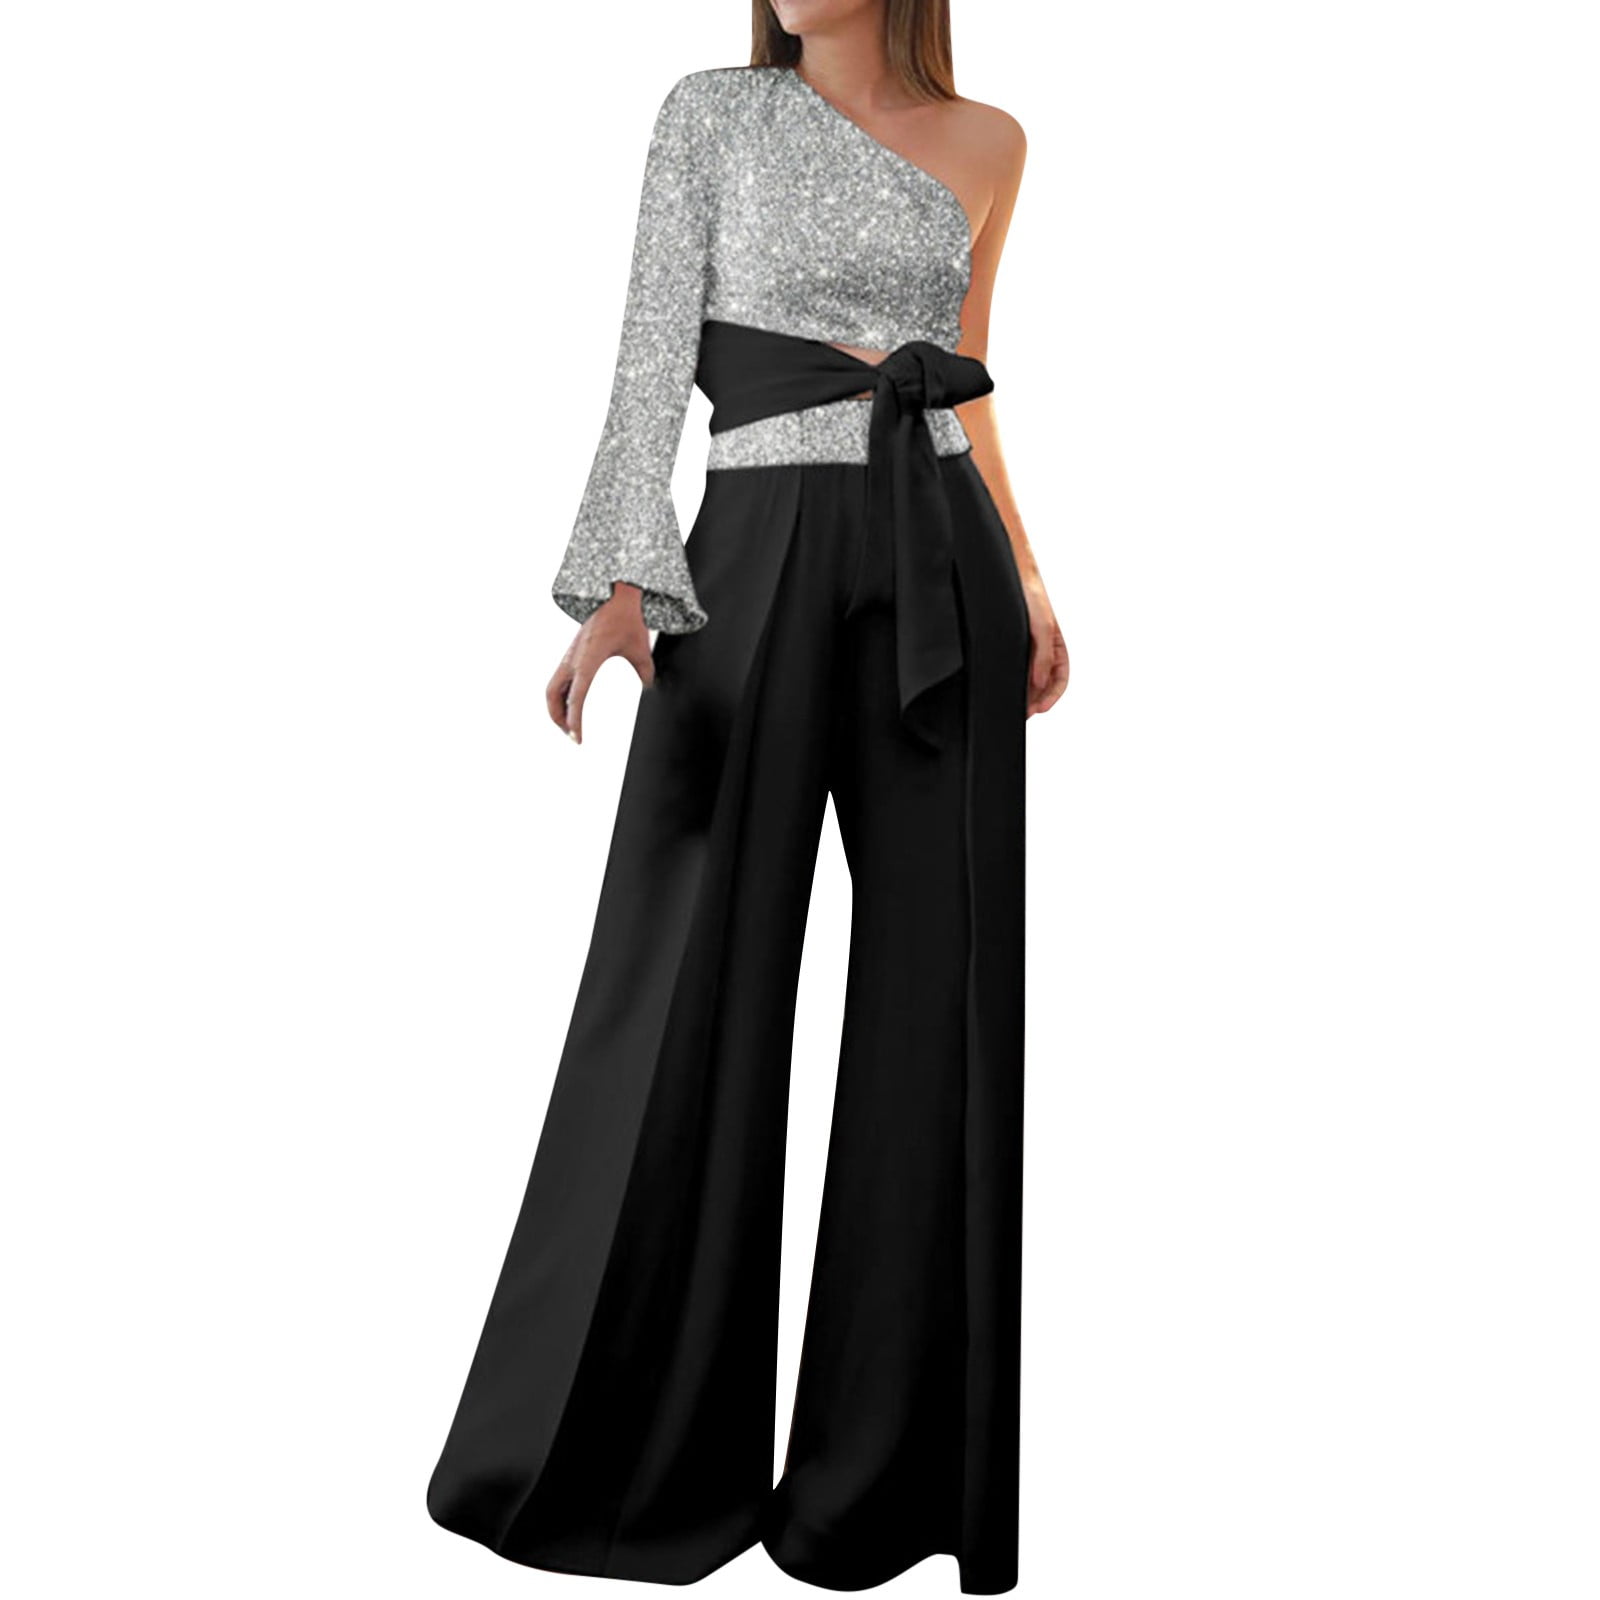 outfit_1253109 | Dressy pant suits, Suits to wear to a wedding, Womens  dressy pants